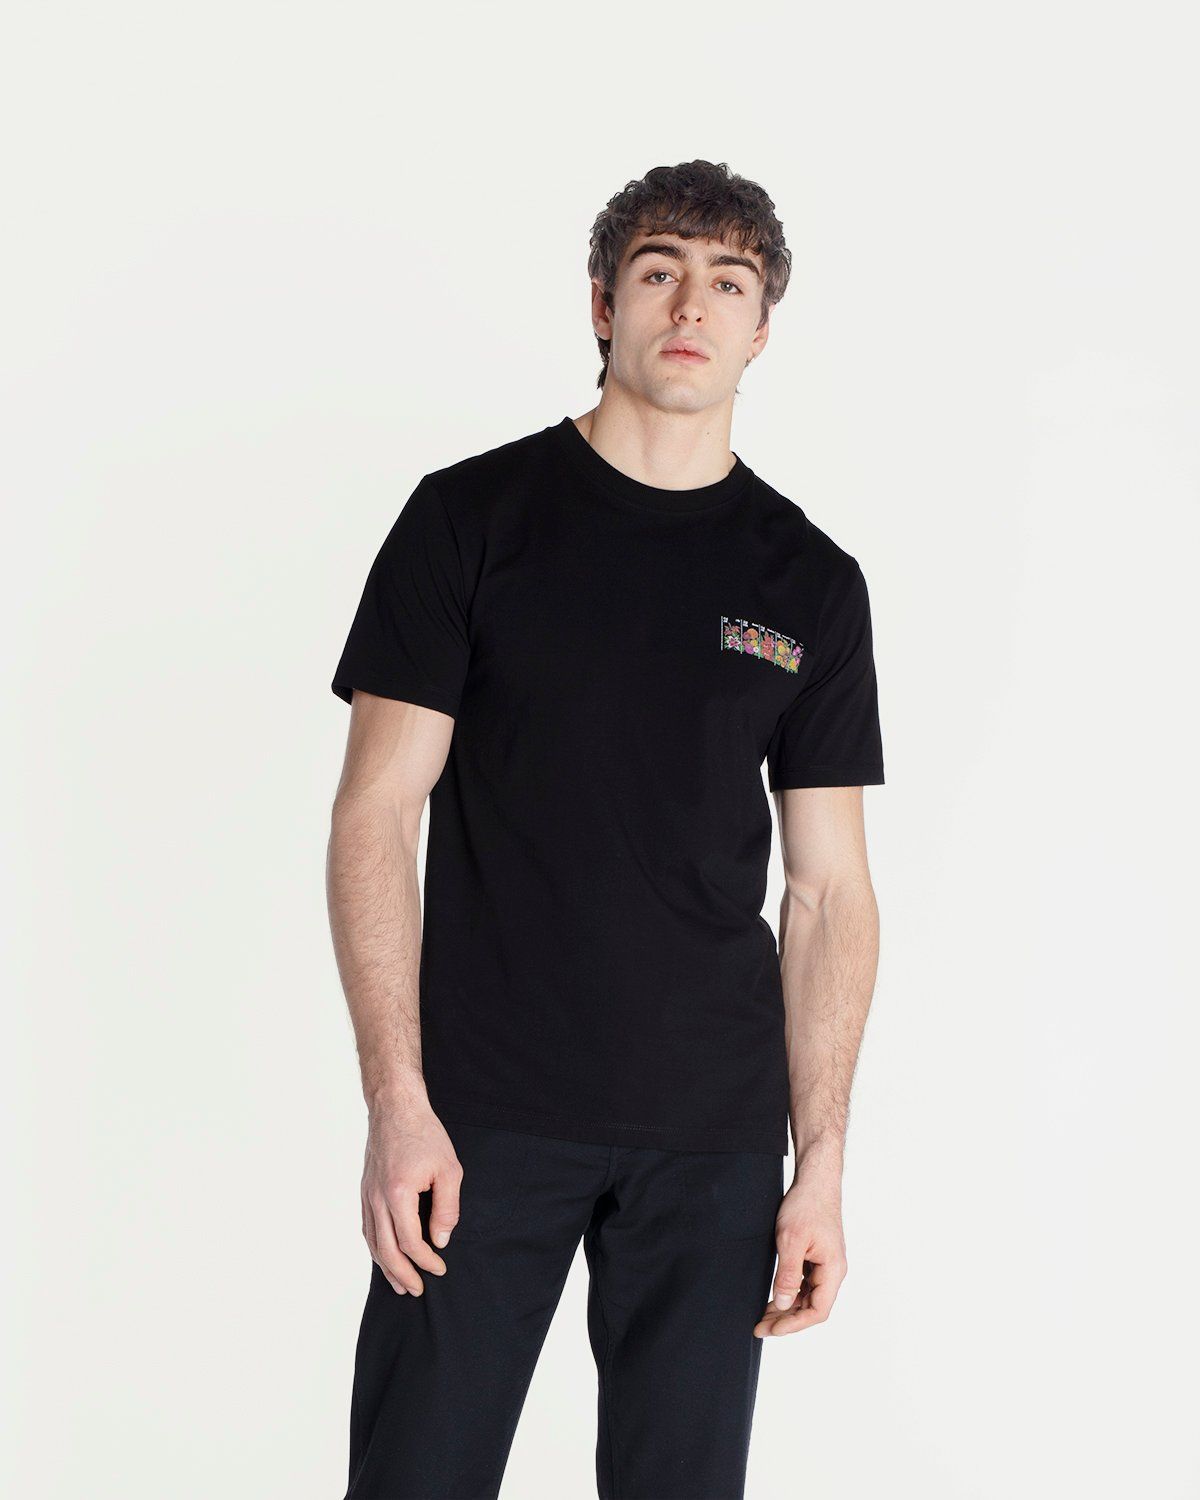 Soulland – Rossell S/S Black - T-Shirts - Black - Image 5